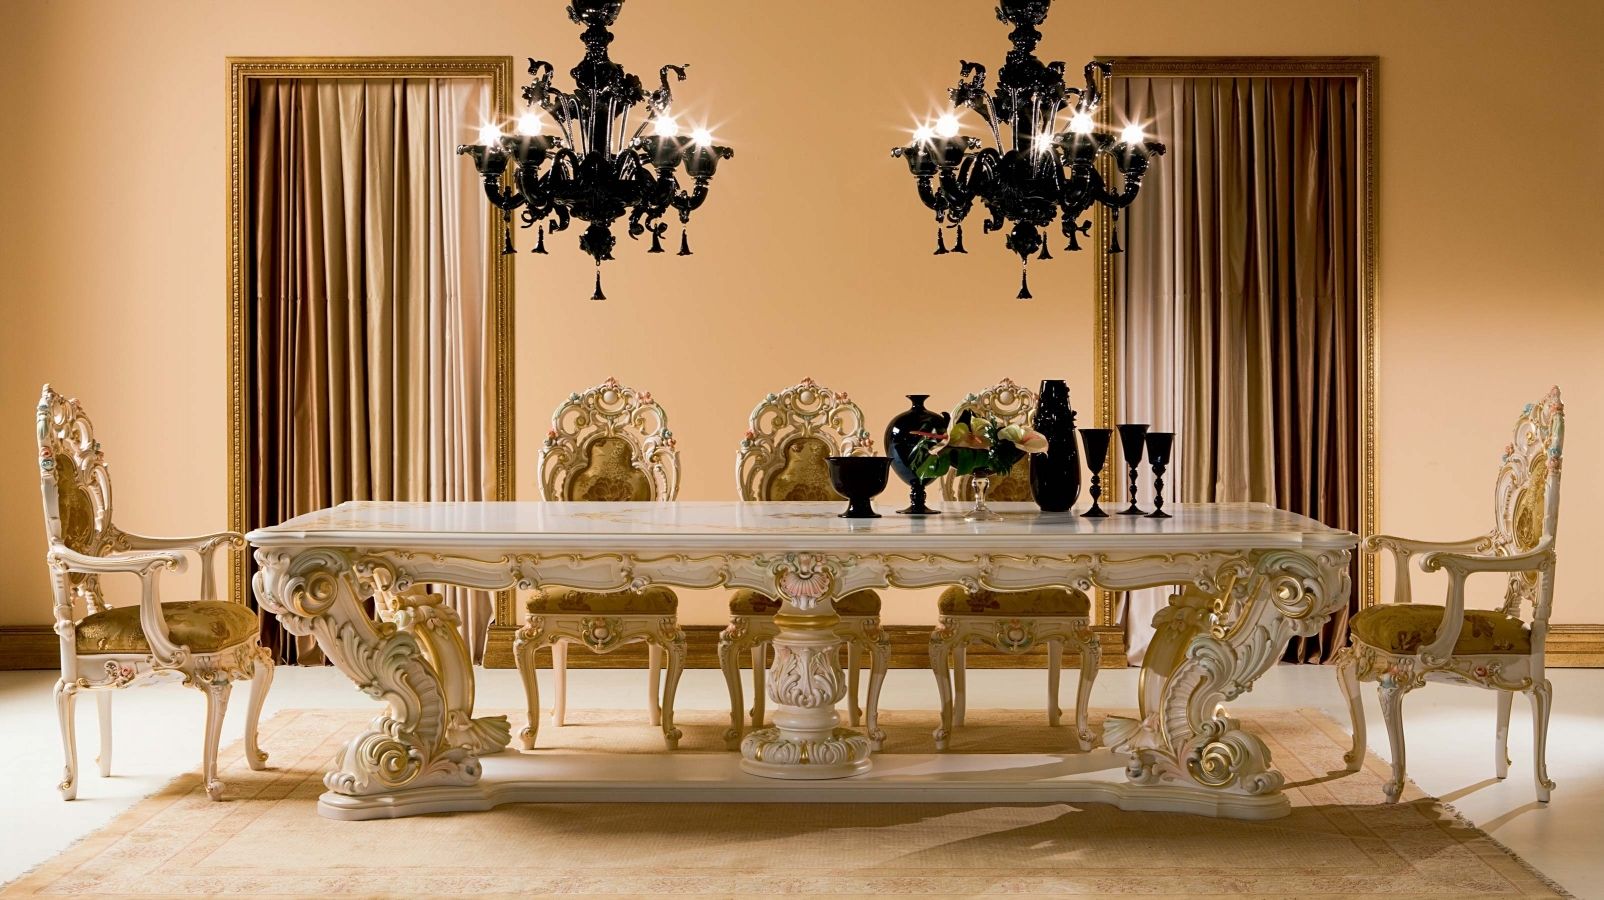 Lavish Classic Dining Table Designs as Attractive Focal Point with